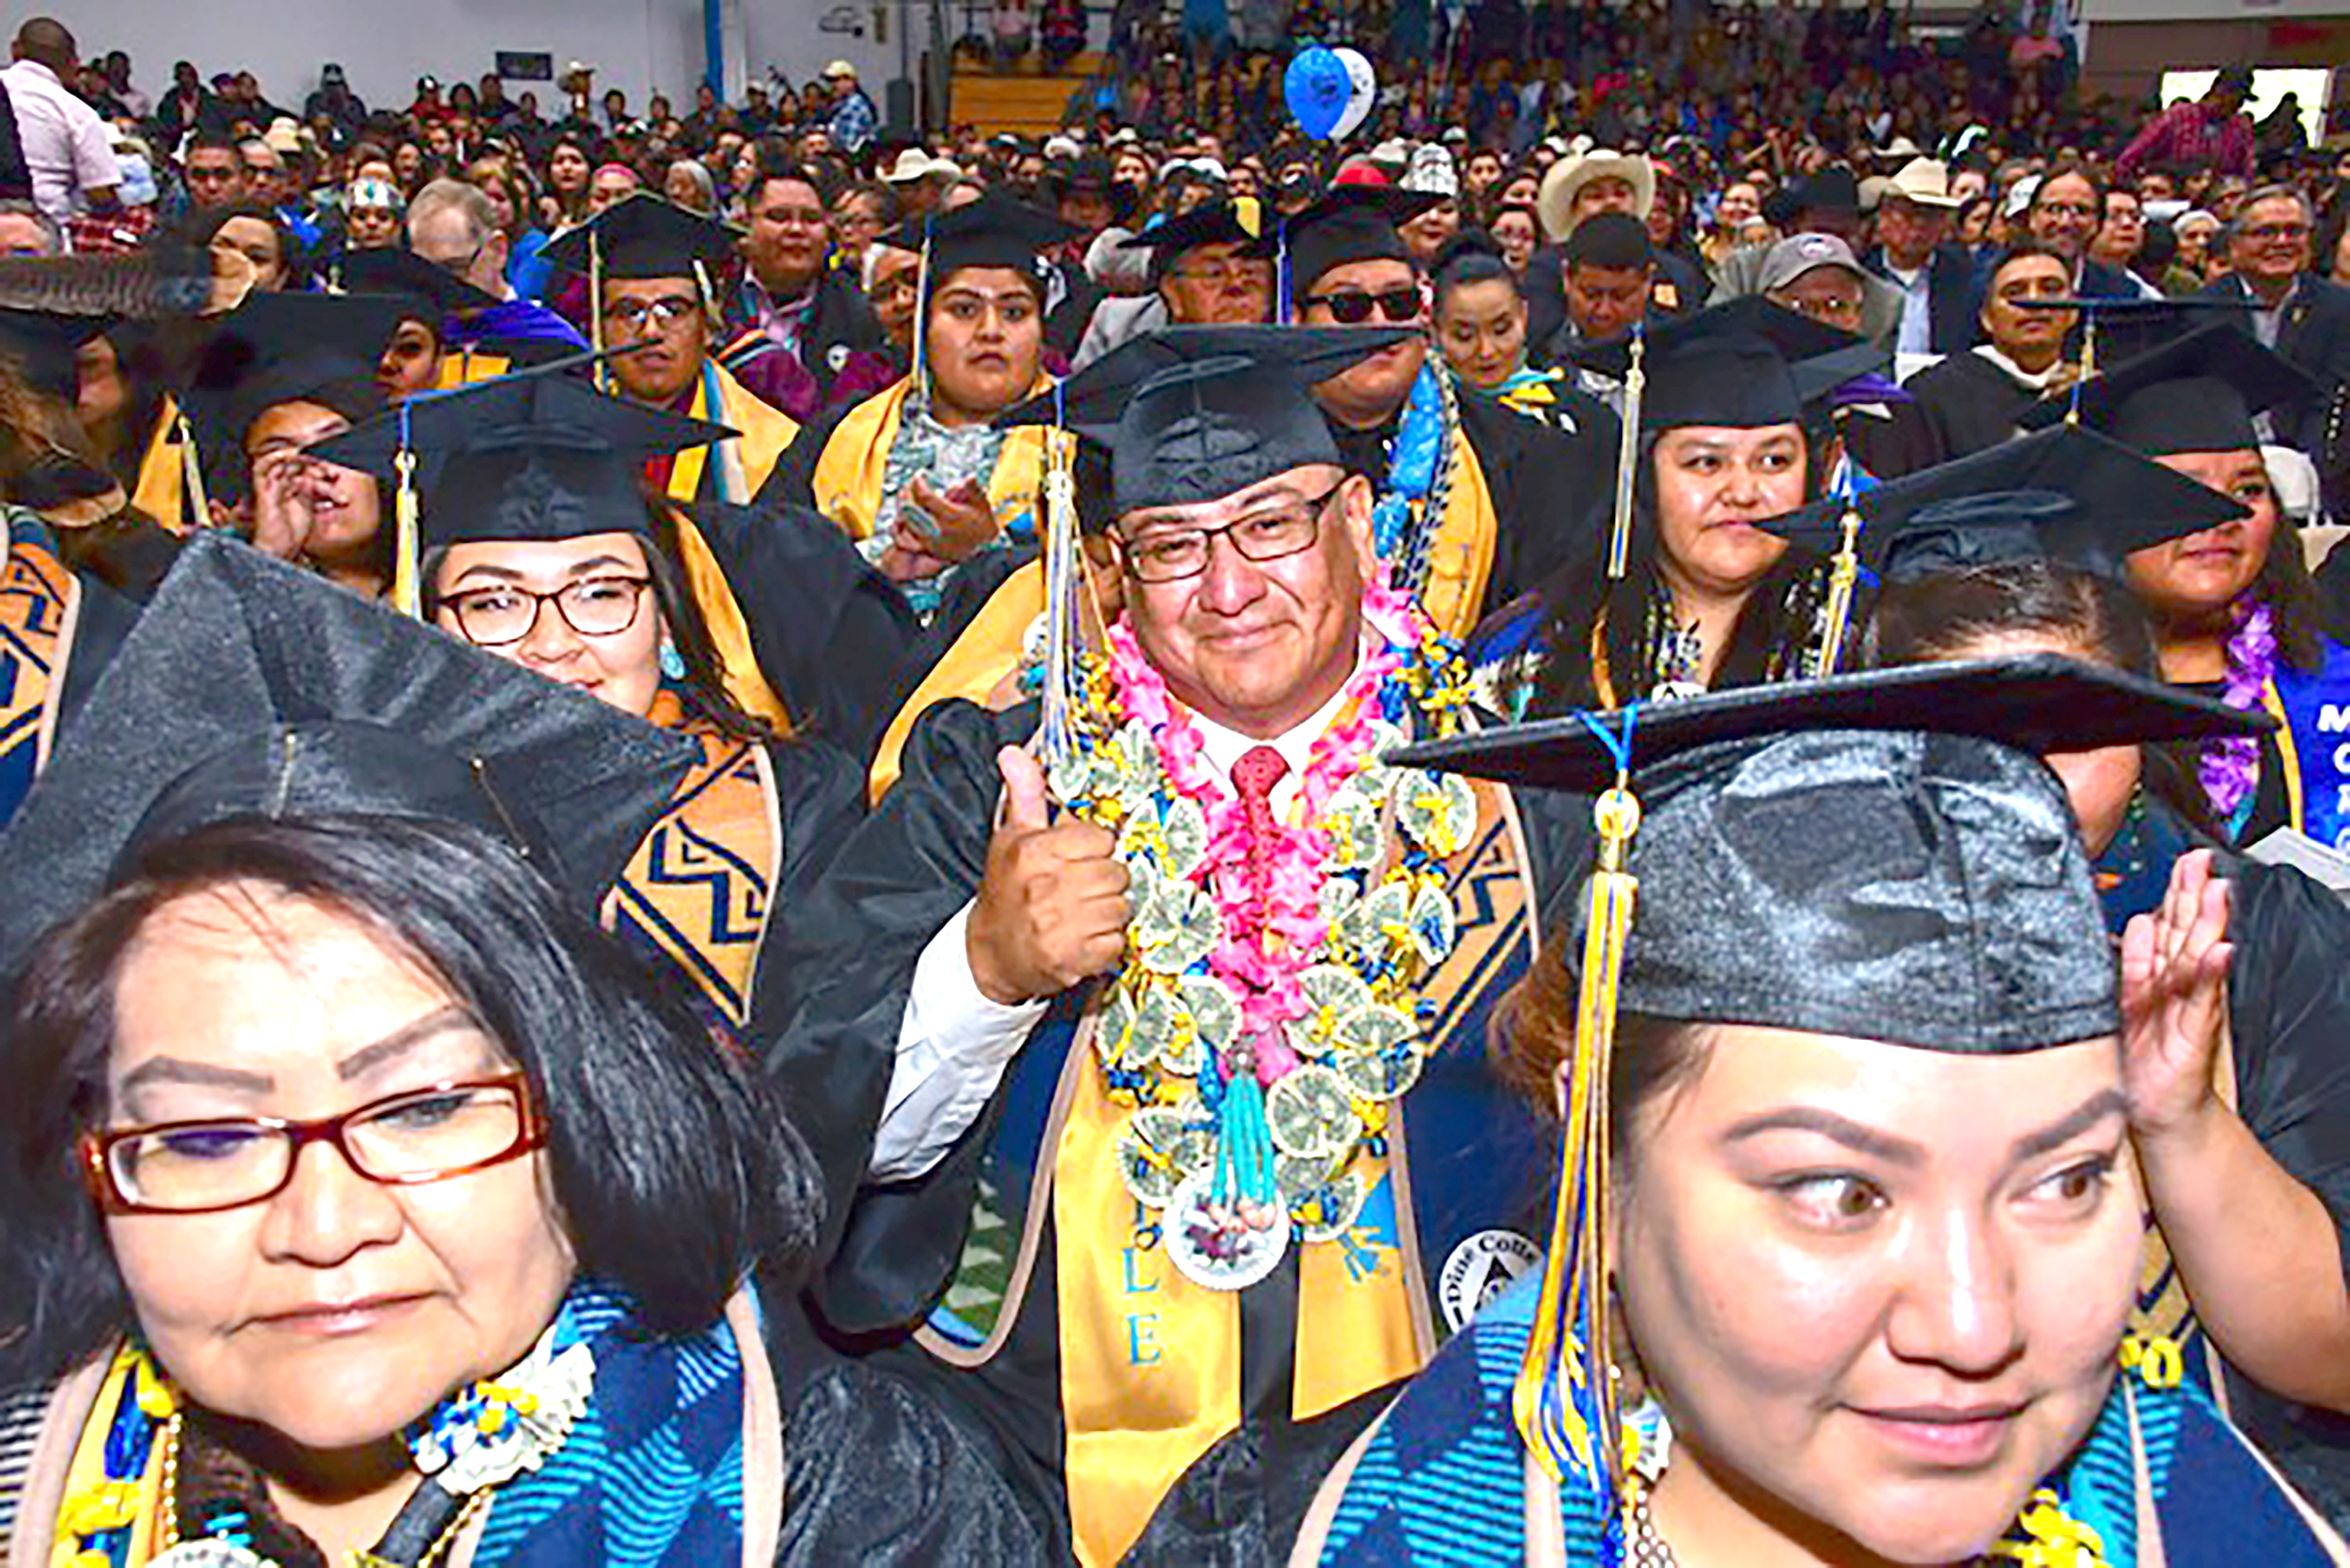 Diné College earns No. 5 spot as highest ranked tribal college in U.S